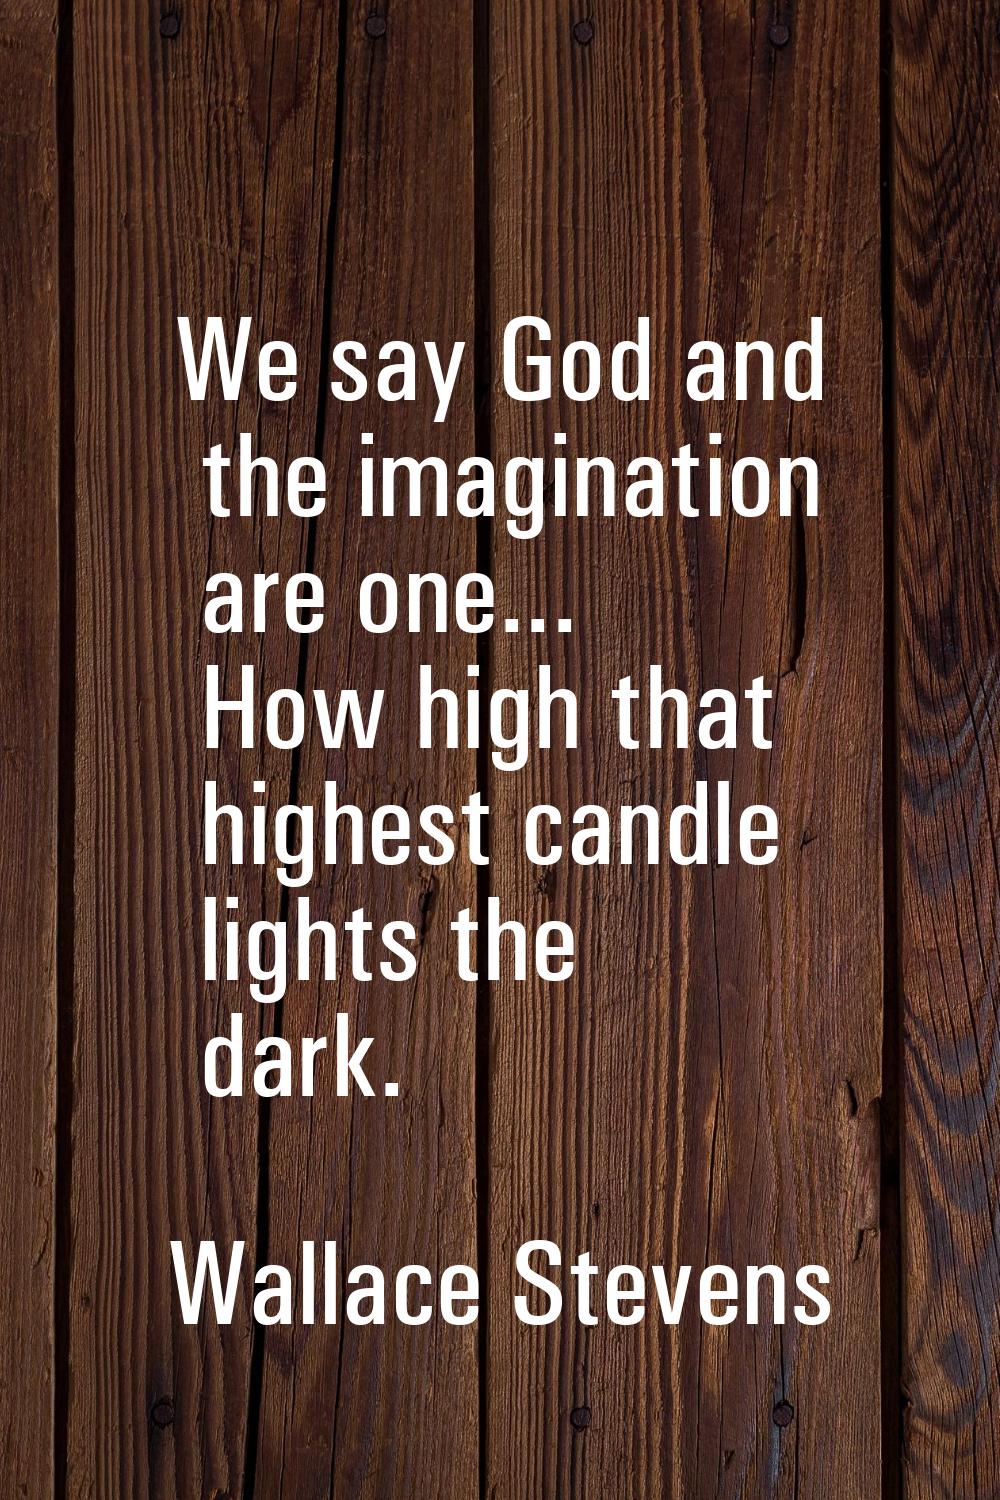 We say God and the imagination are one... How high that highest candle lights the dark.